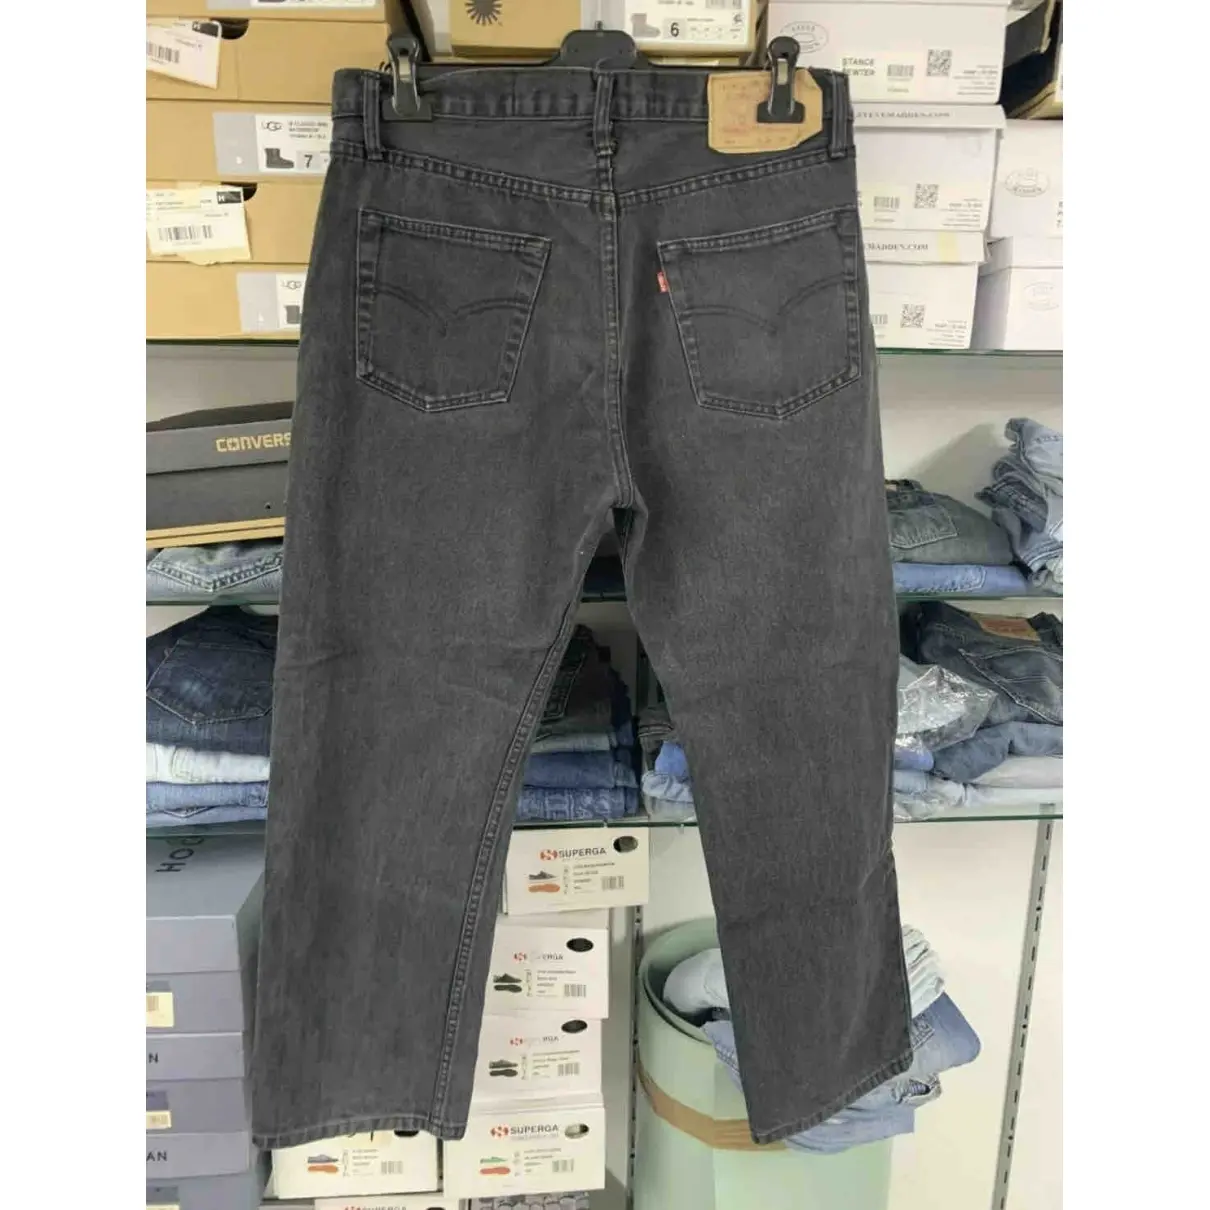 Levi's Vintage Clothing Straight jeans for sale